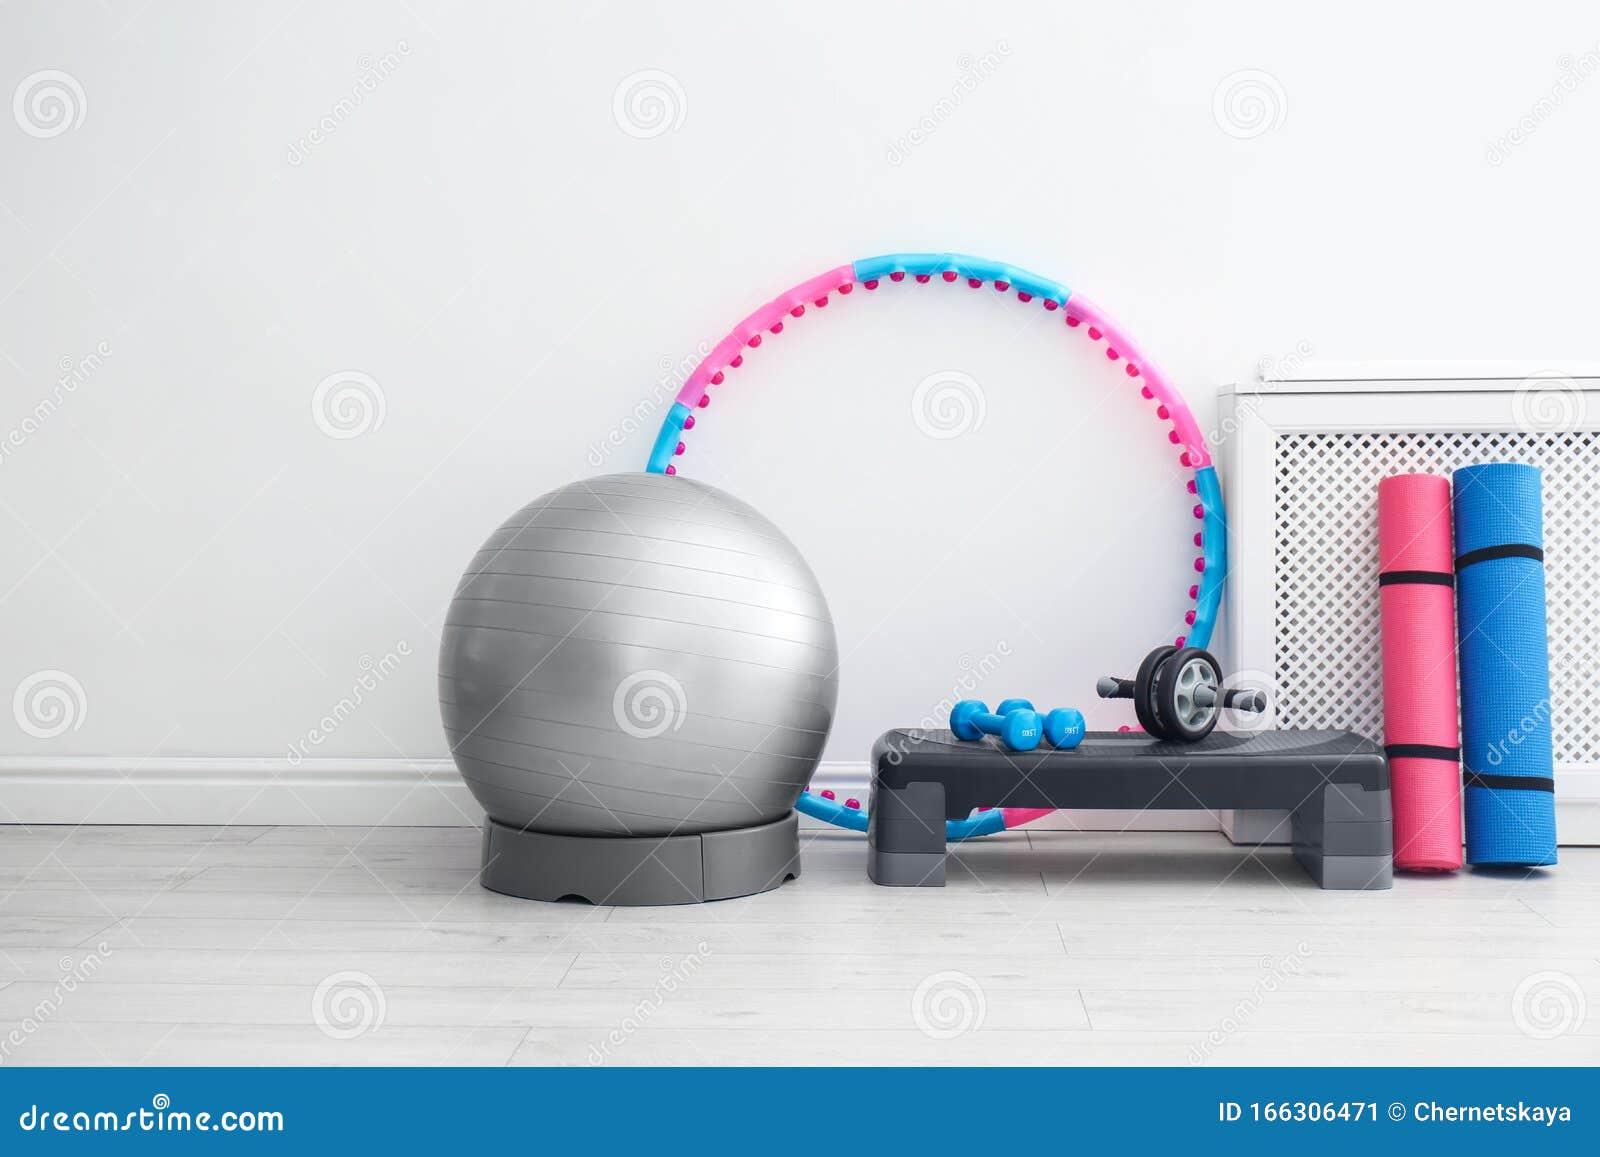 Different Sports Equipment Near Wall In Gym Stock Image - Image of dumbbells, recovery: 166306471